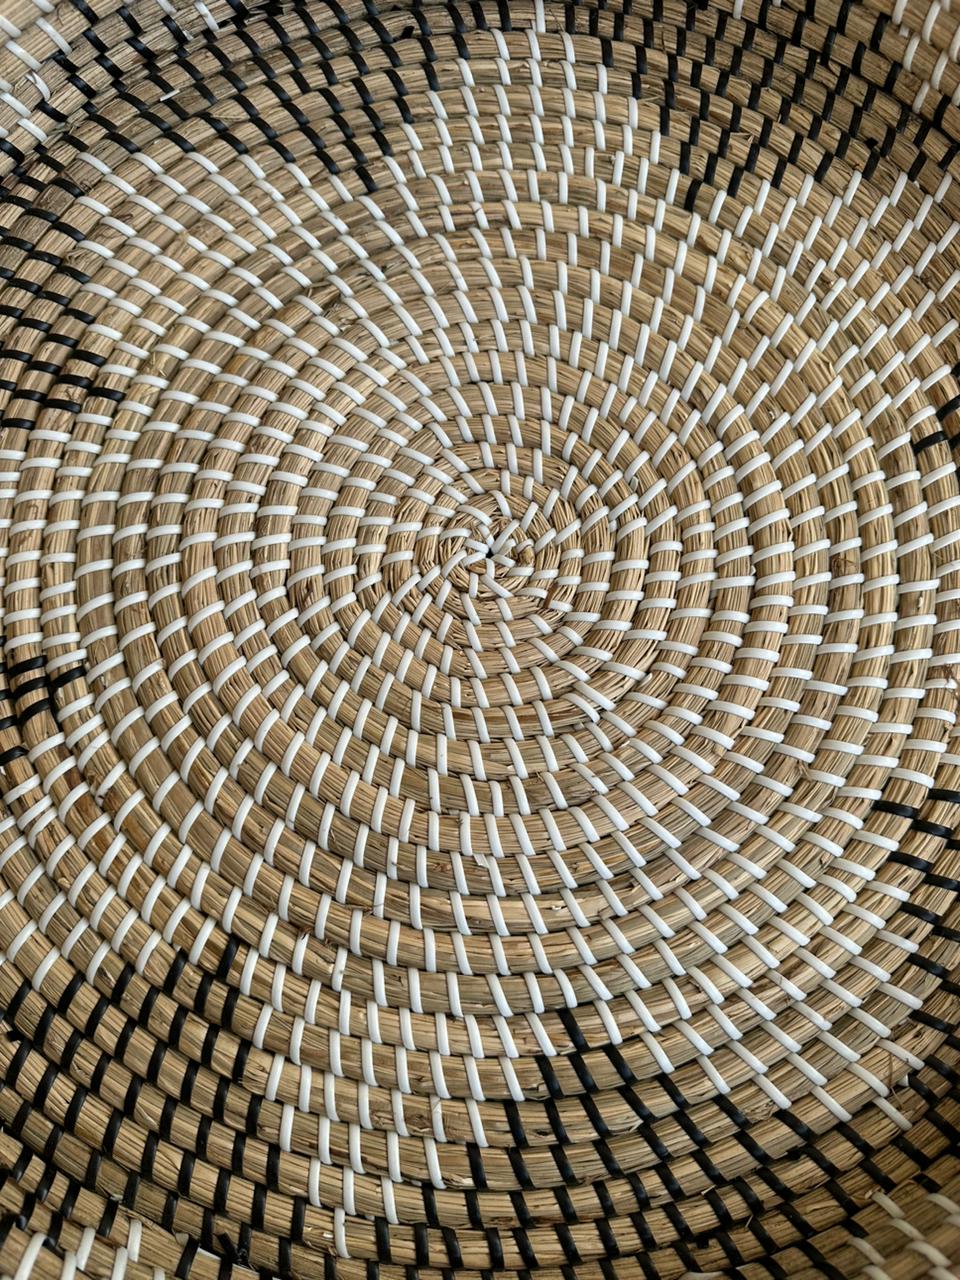 Rattan Round Table Tray Enhance your Dream Home with our curated selection of premium Home Décor items. This beautifully handwoven multi use seagrass and rattan tray table is ideal for bathroom essentials, decorating the coffee table, can be kept beside the bed or sofa and house warming gifts. TESU